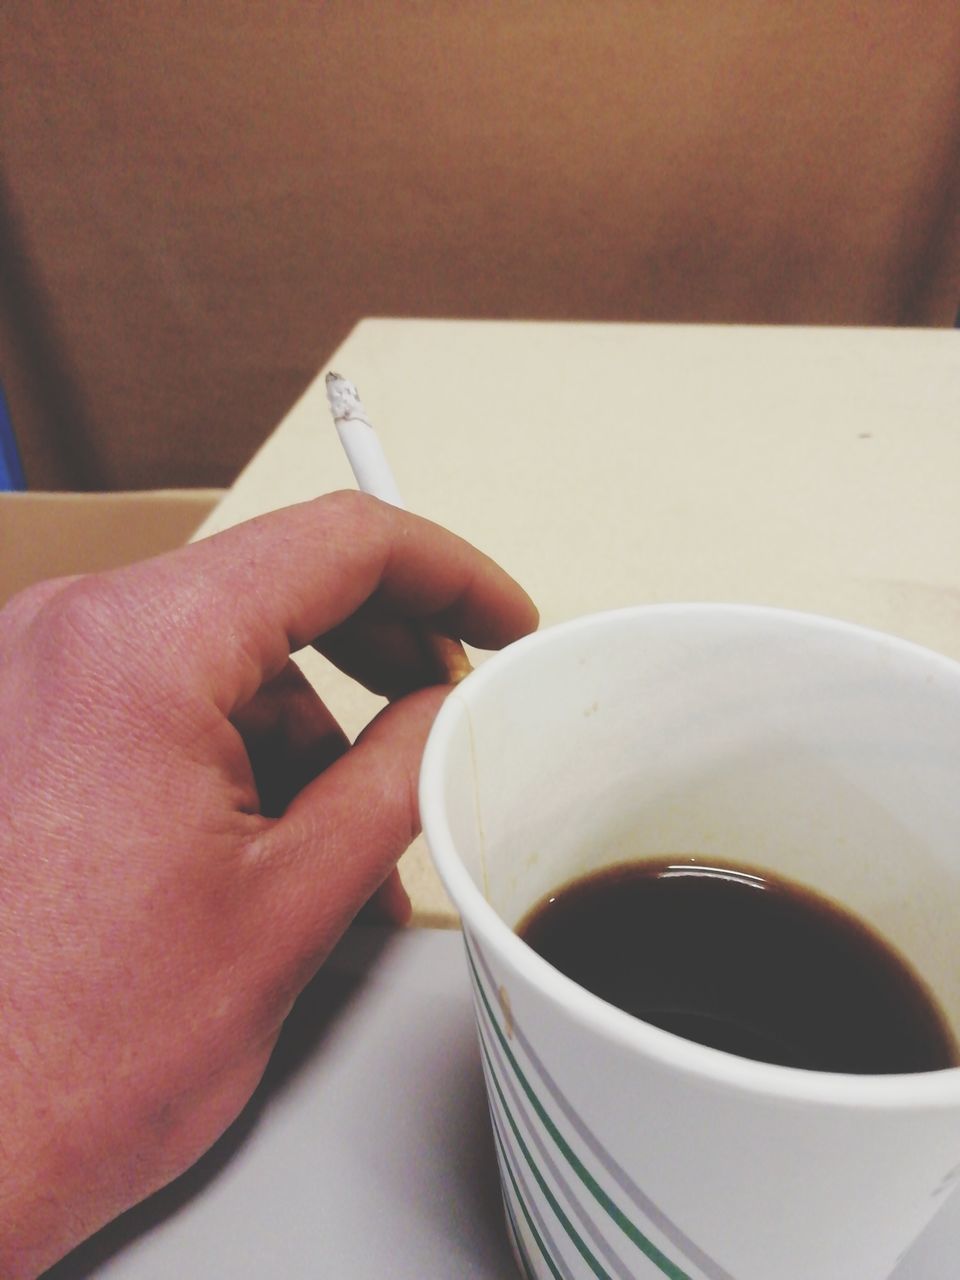 HAND HOLDING COFFEE CUP